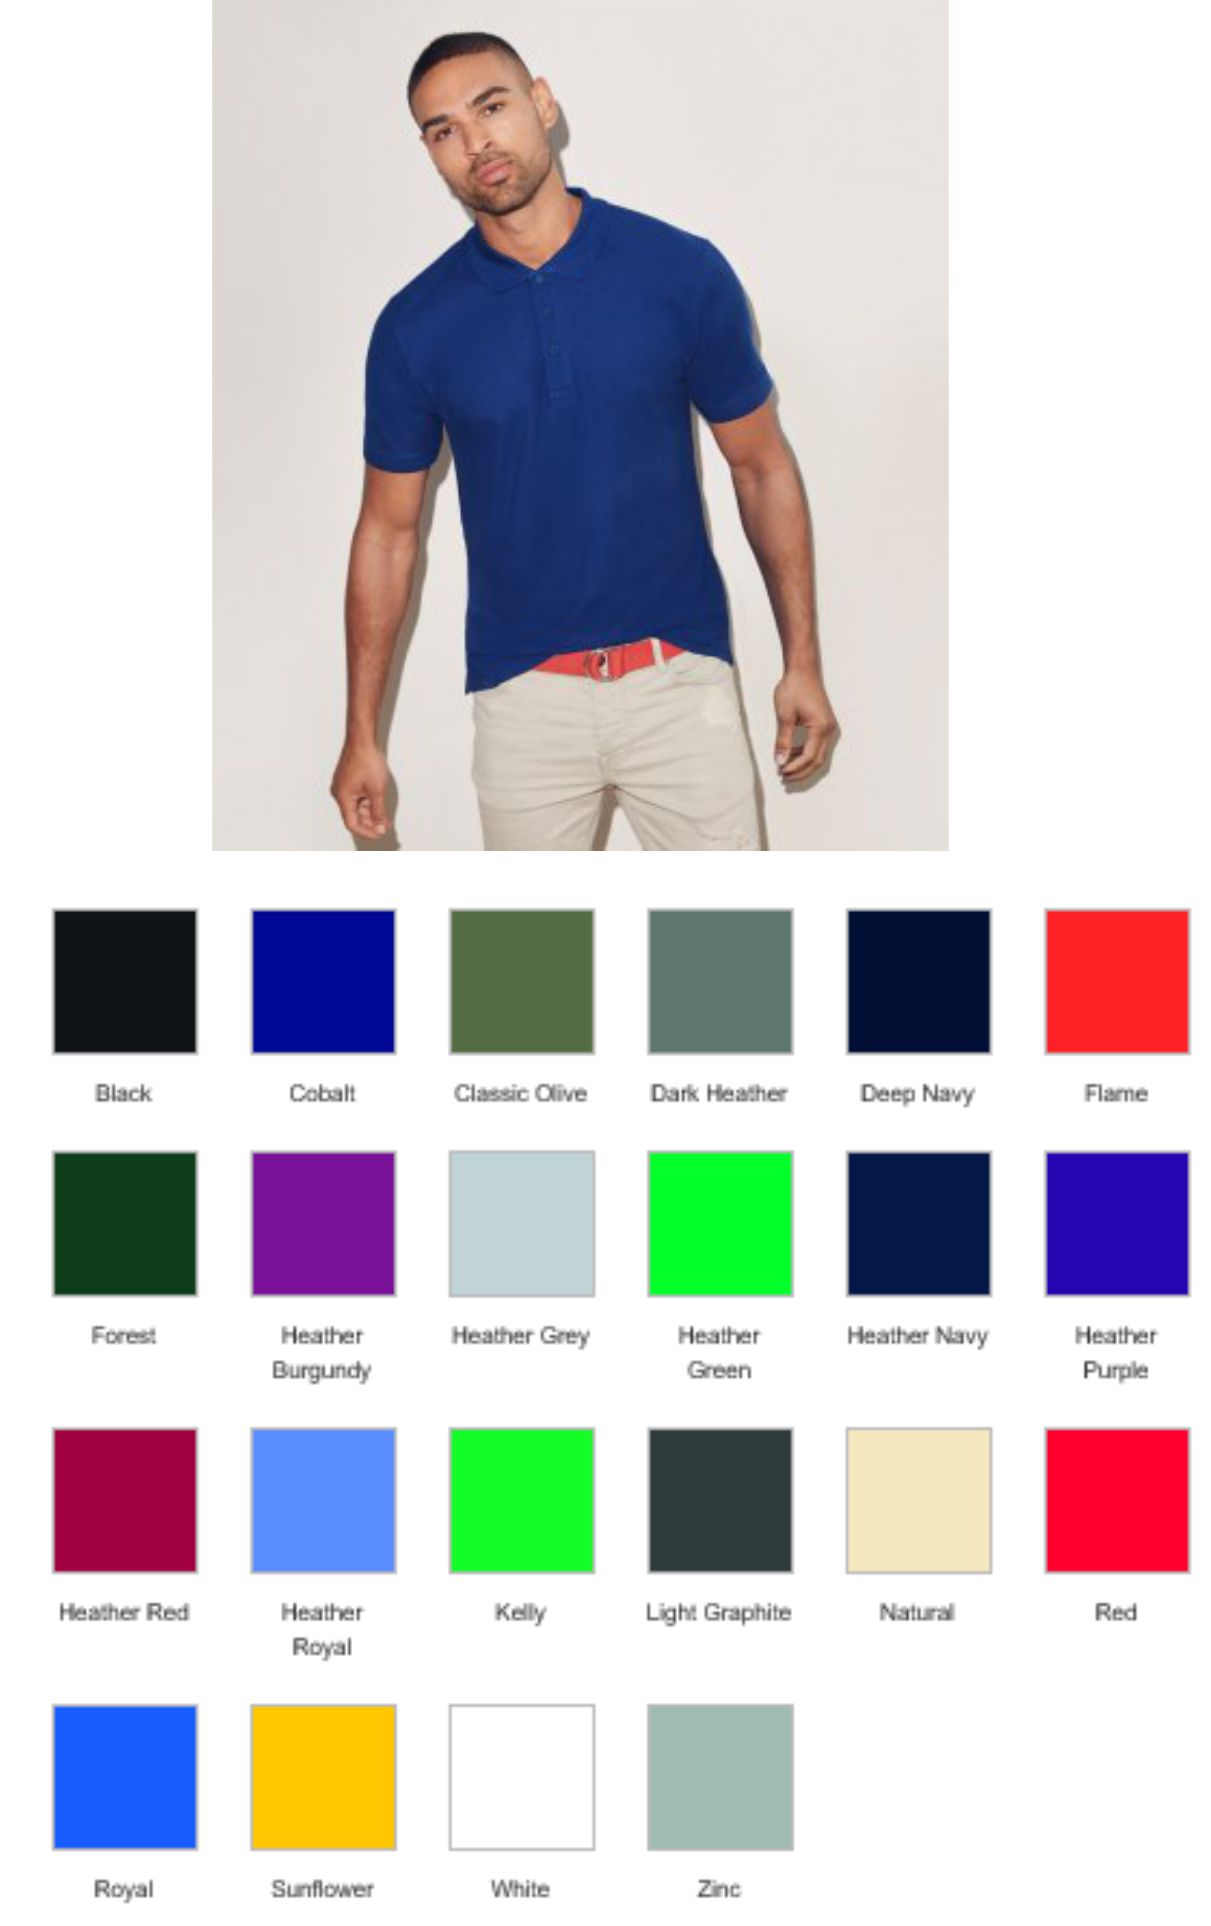 Fruit of the Loom SS220 Iconic Pique Polo Shirt